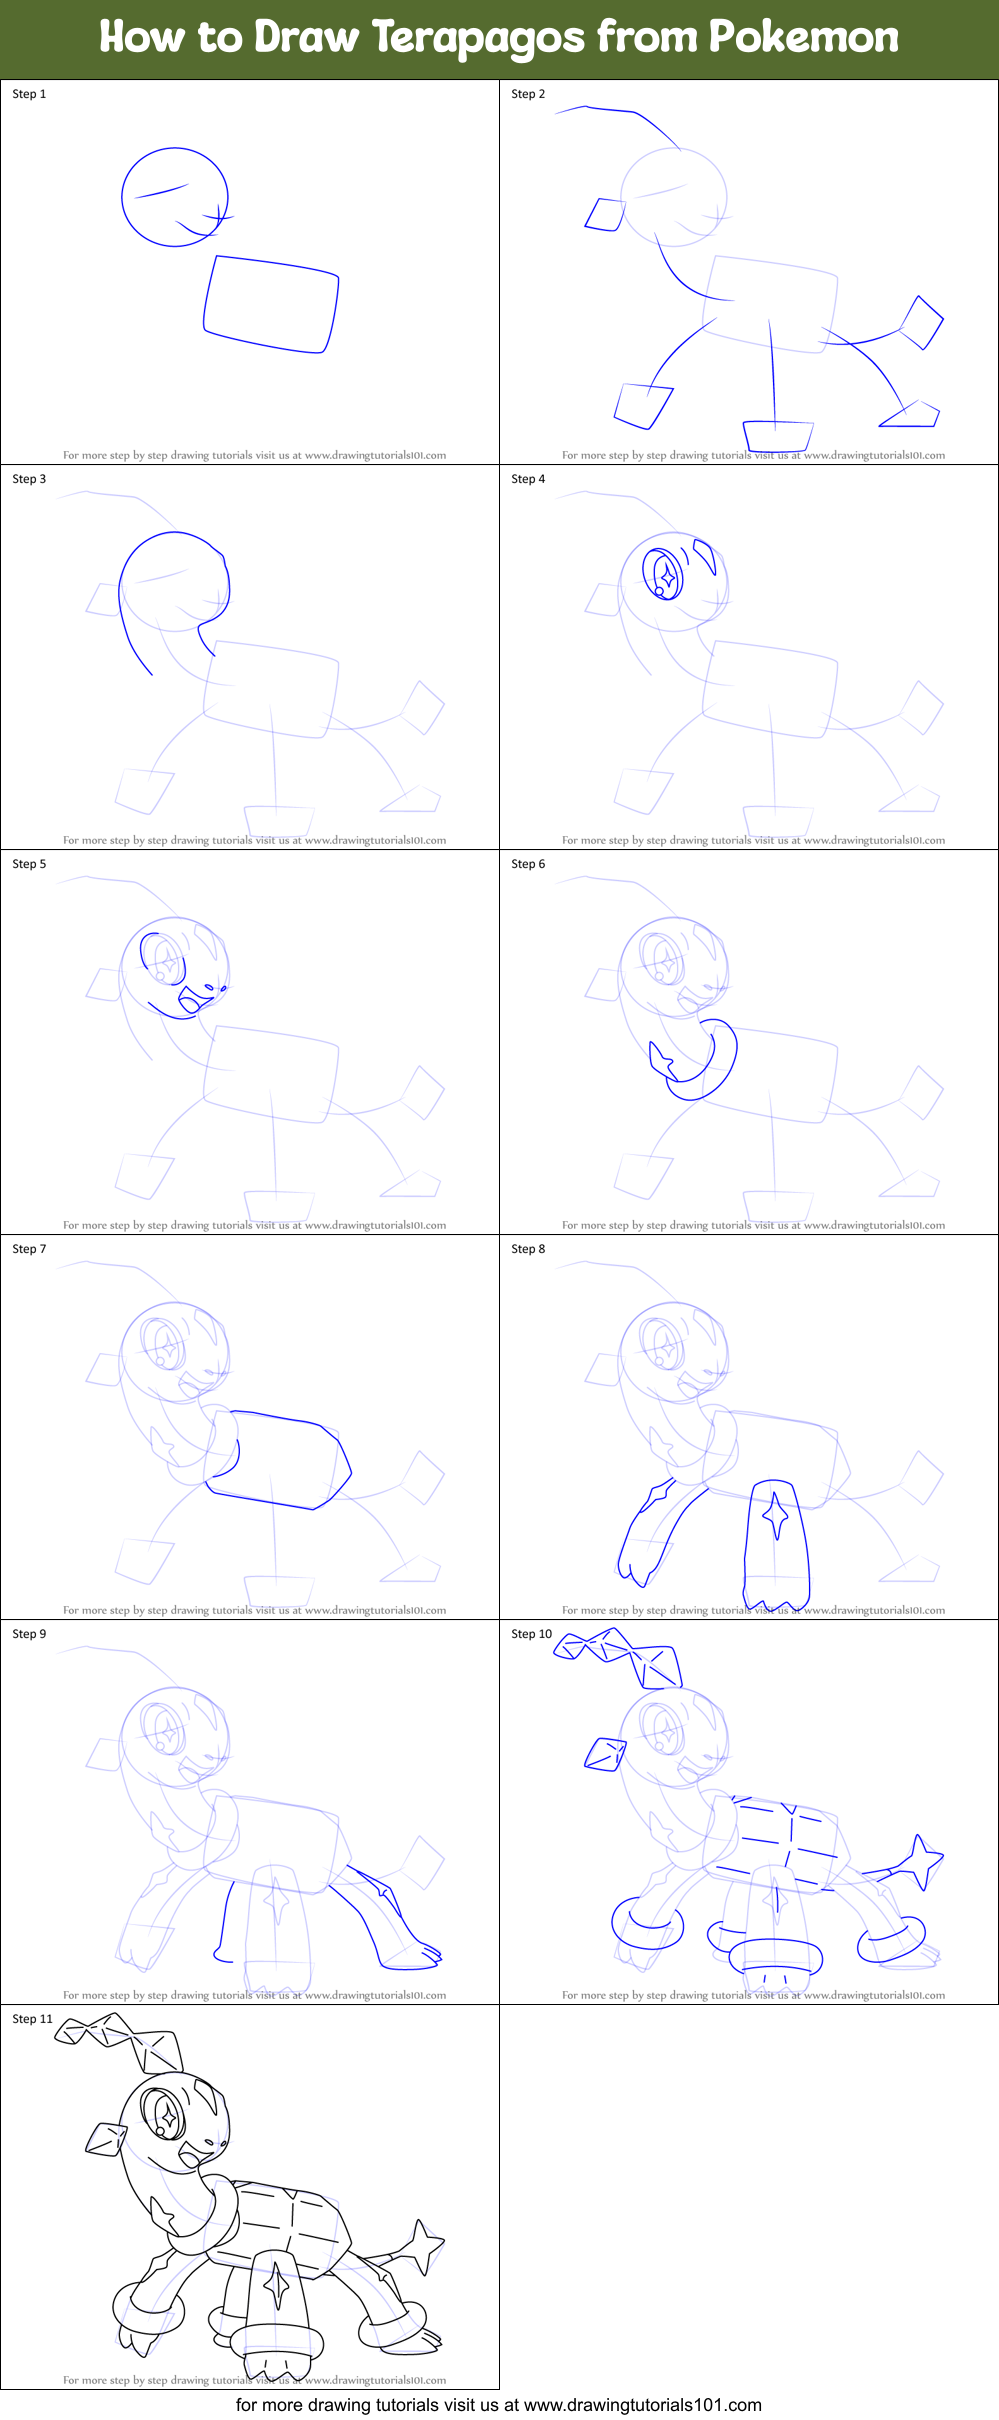 How to Draw Terapagos from Pokemon (Pokemon) Step by Step ...